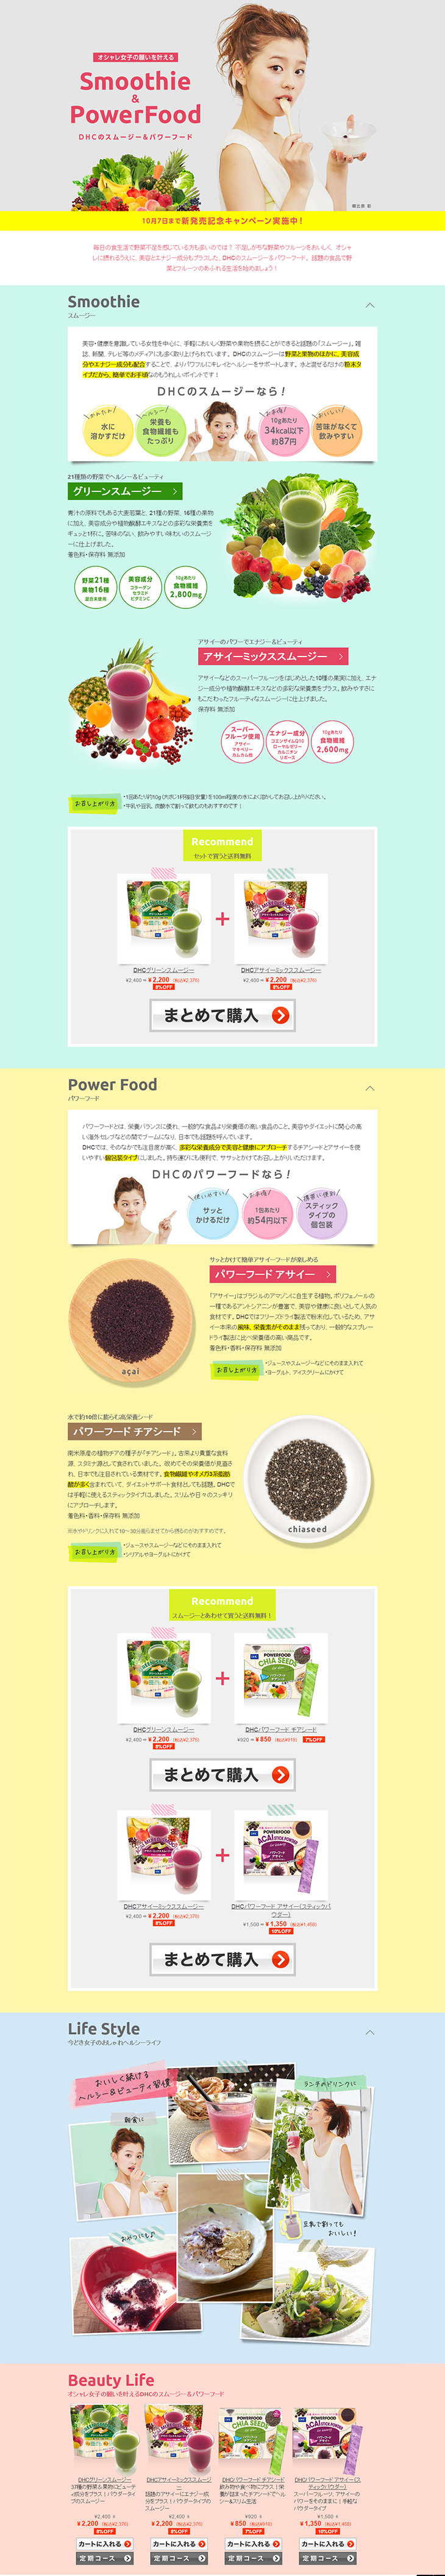 Smoothie&PowerFood_pc_1